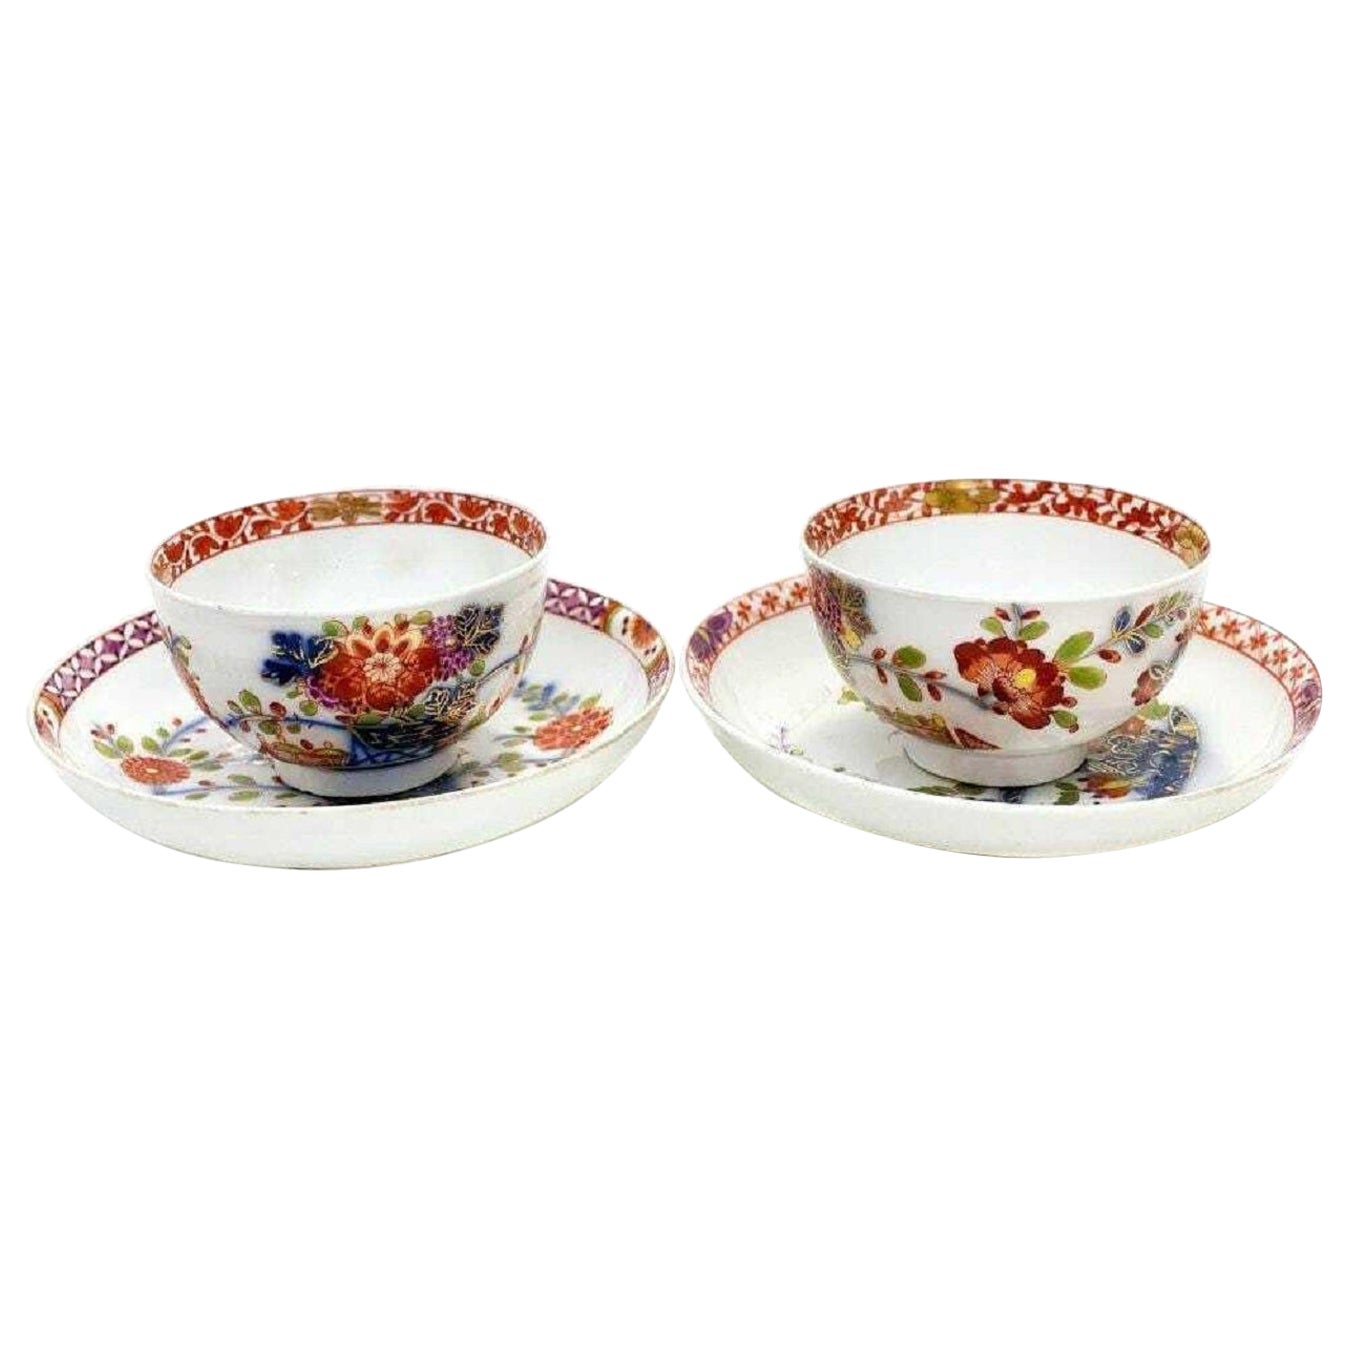 Pair of Meissen Germany Tischchenmuster Porcelain Cup and Saucers, circa 1735